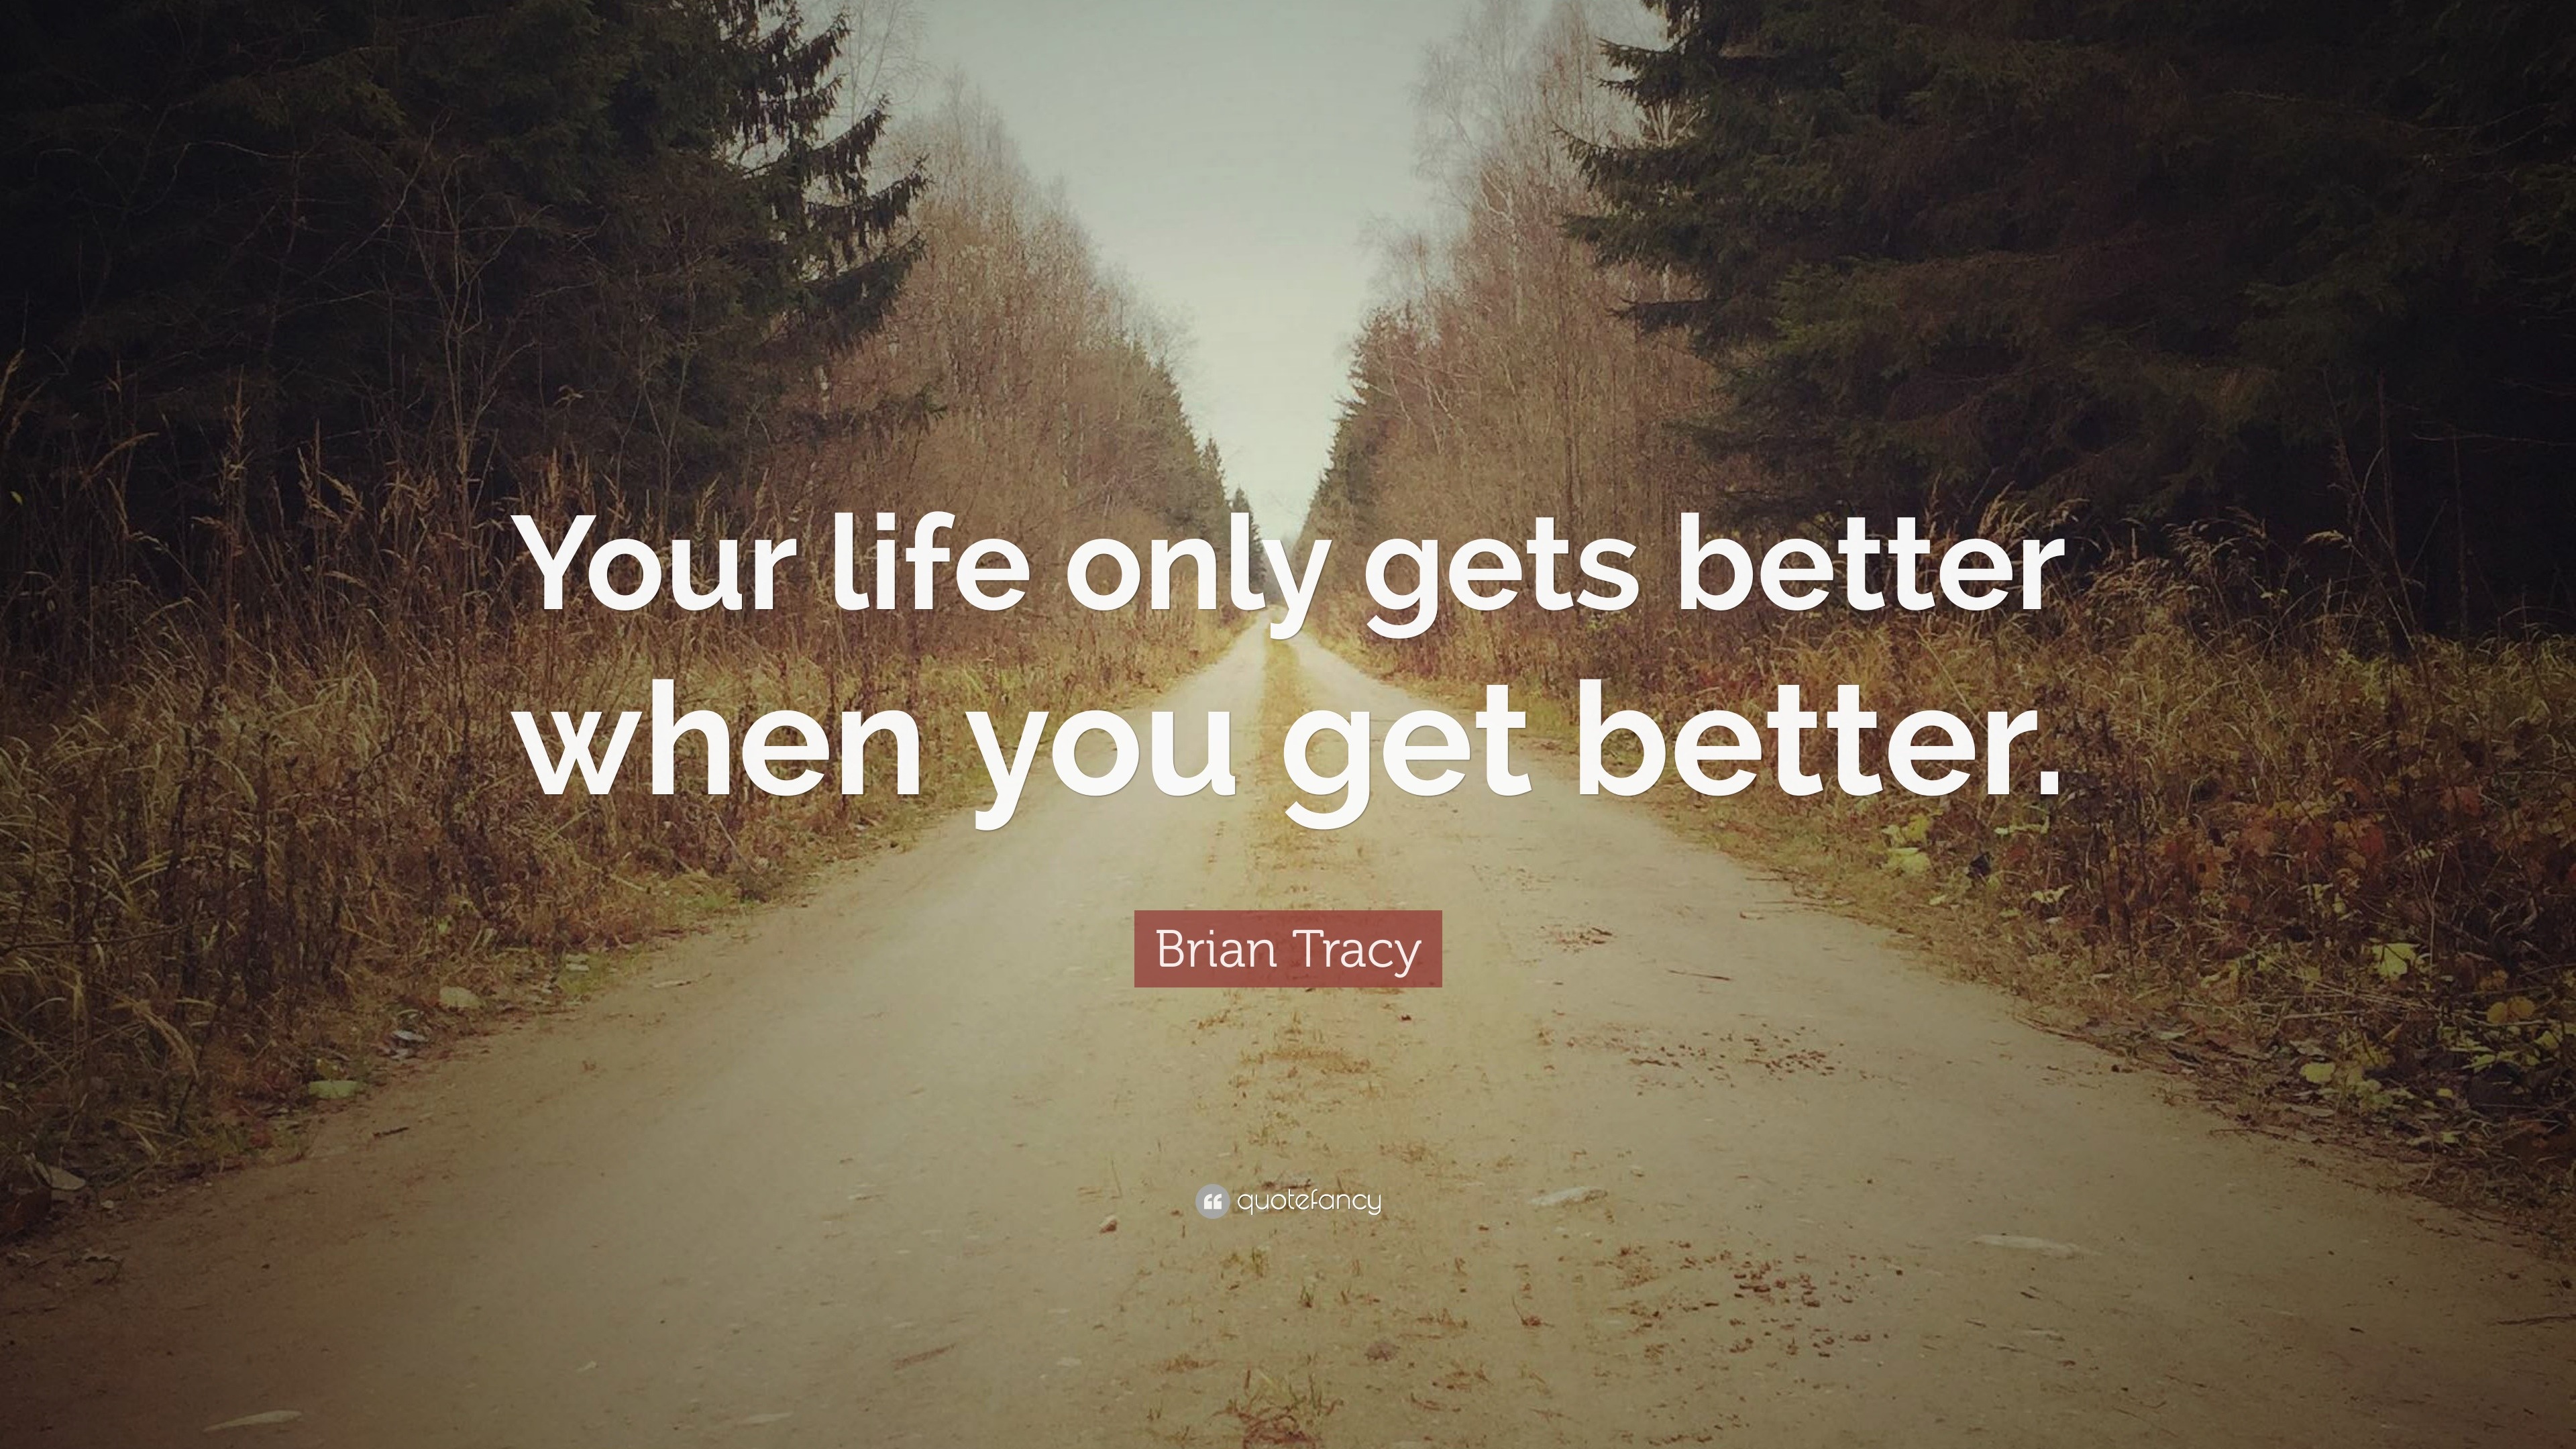 Brian Tracy Quote “your Life Only Gets Better When You Get Better”